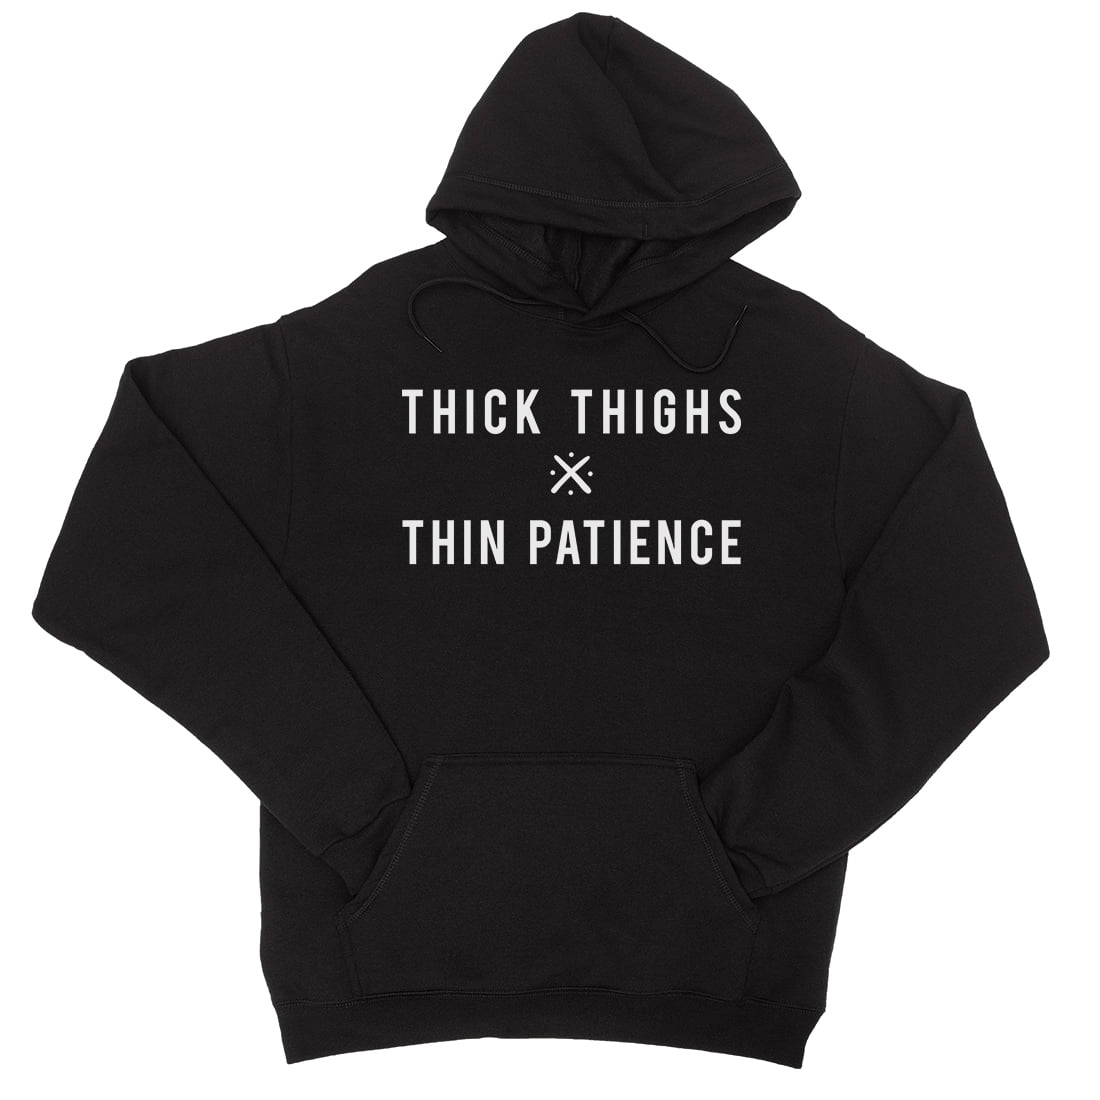 Thick Thighs Thin Patience Funny Sassy Unisex Hoodie 